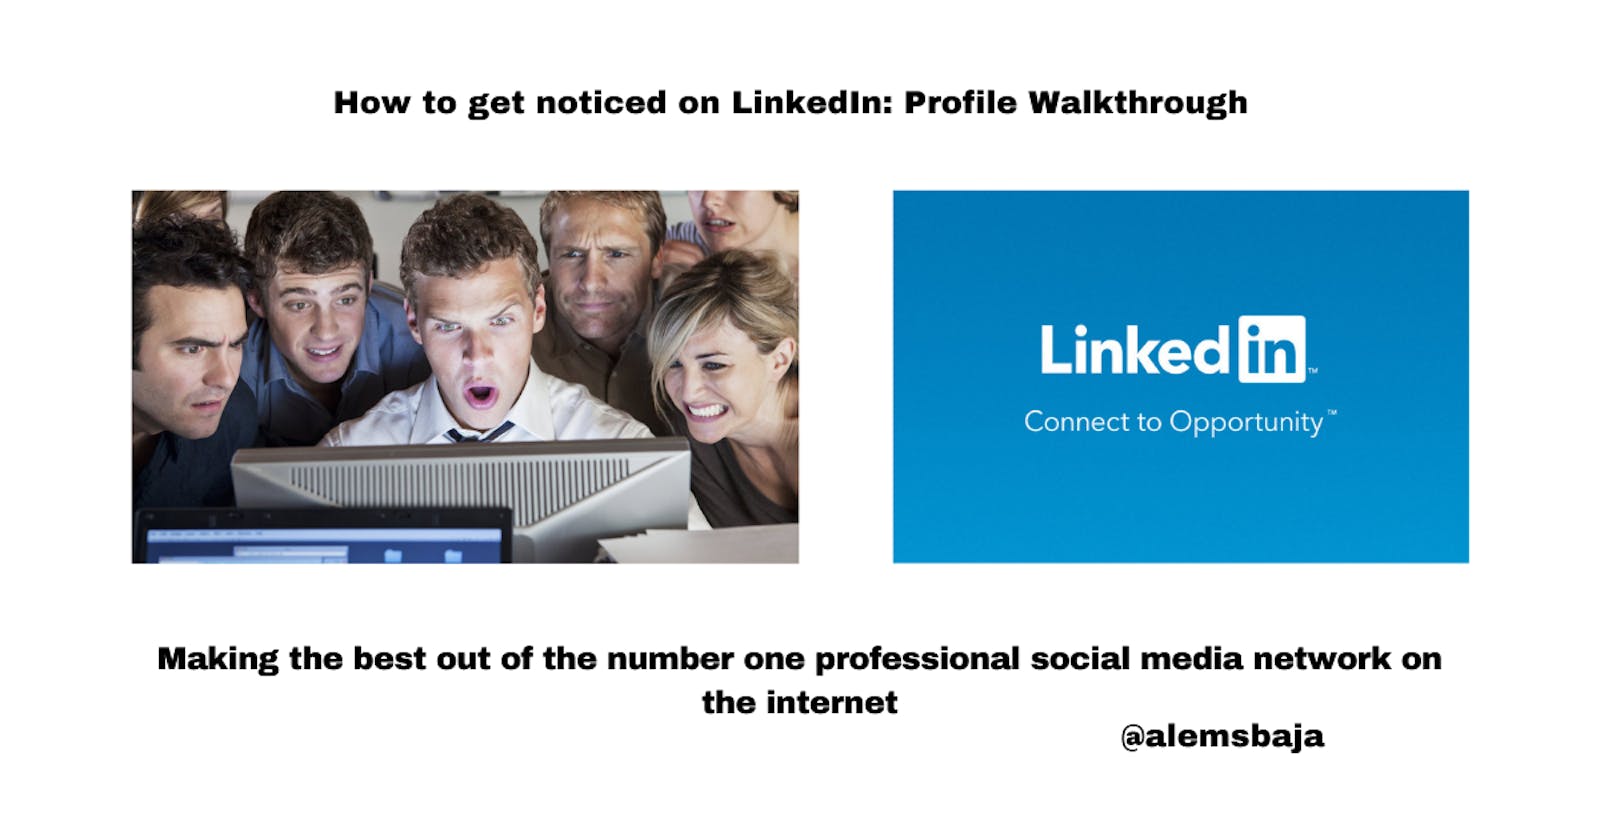 How to get noticed on LinkedIn: Profile Walkthrough